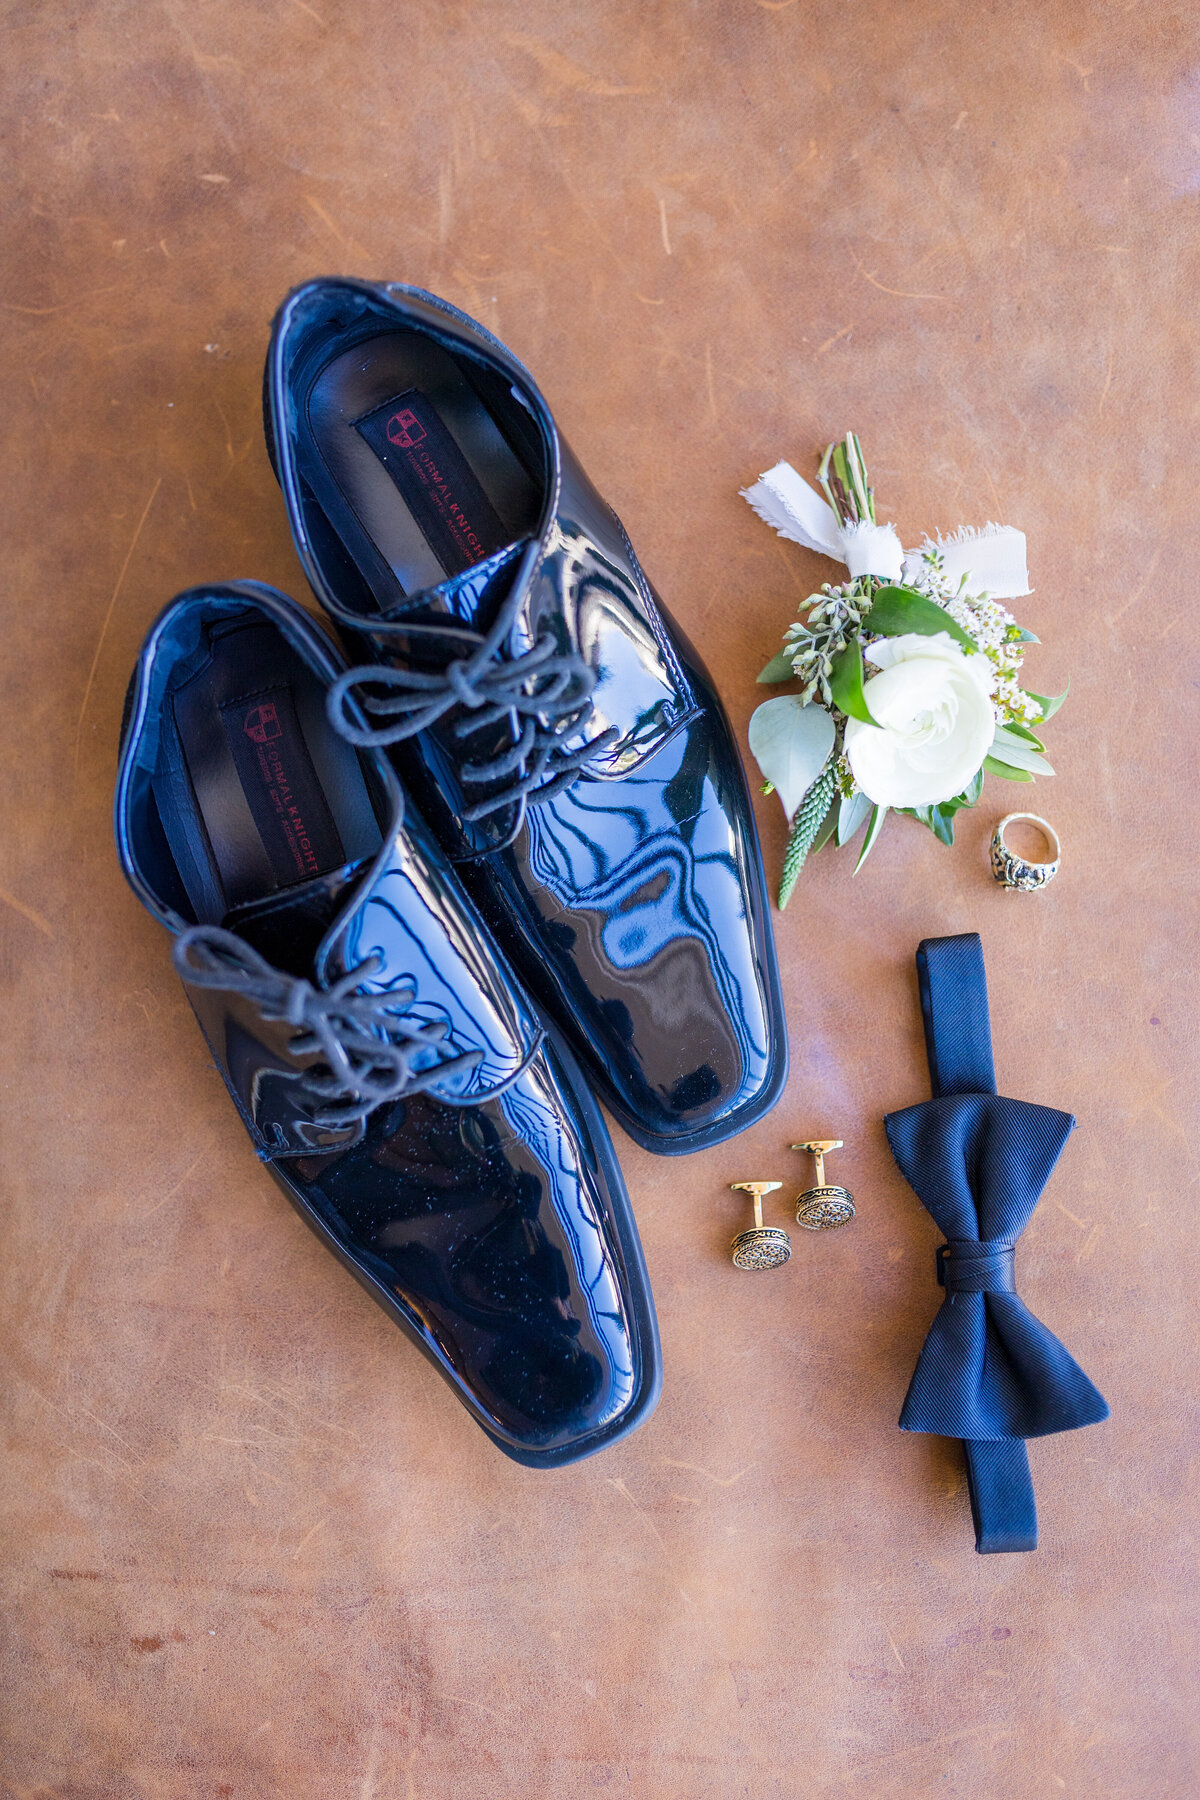 A collection of groom's details including his shoes, bow tie, ring, cuff links, and boutonniere.